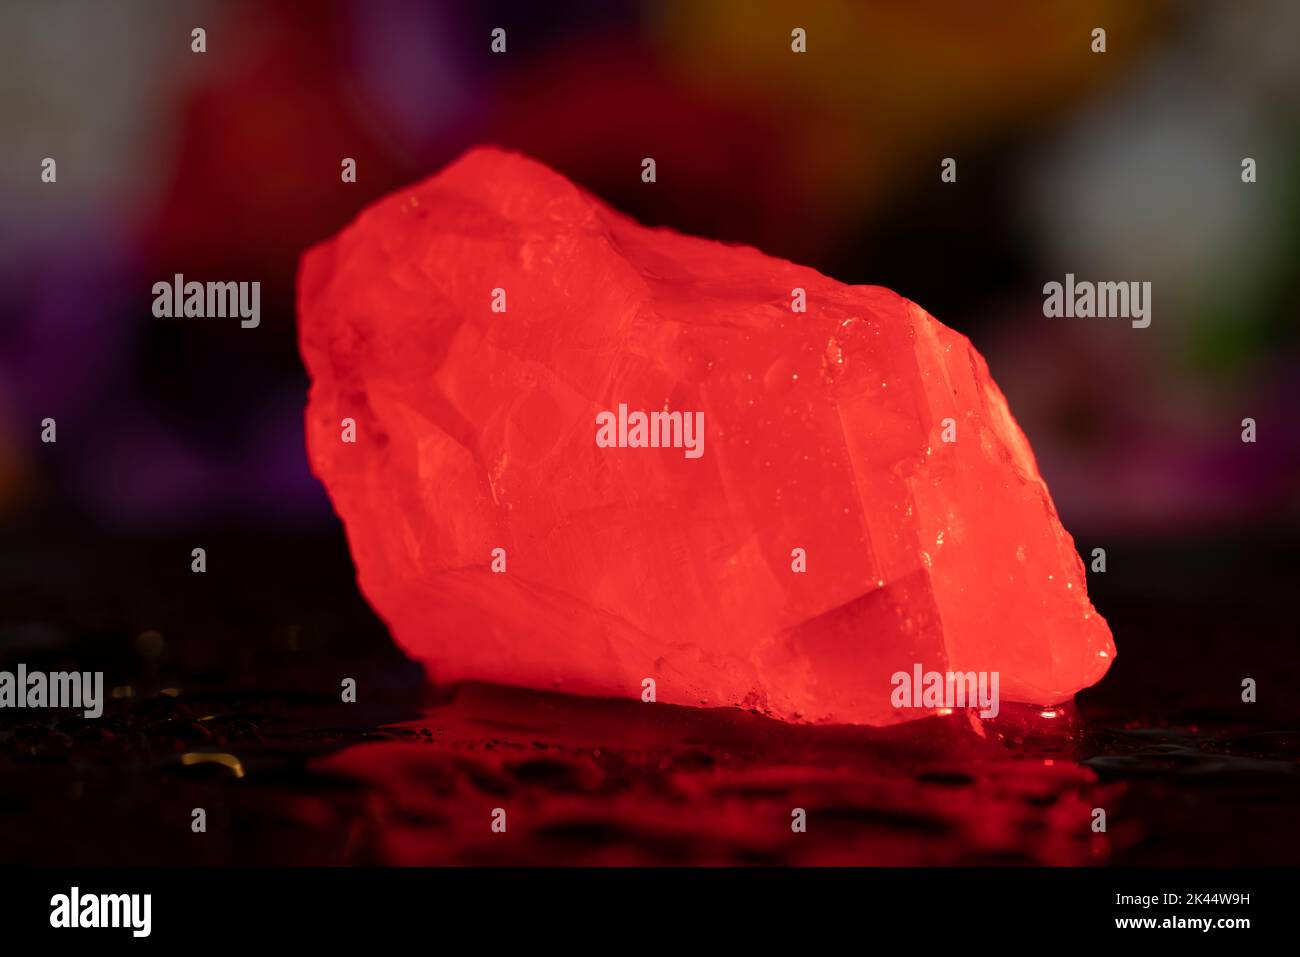 Small white calcite stone on the wet surface in the red light. Light made stone bloody red. Macro photo. Stock Photo